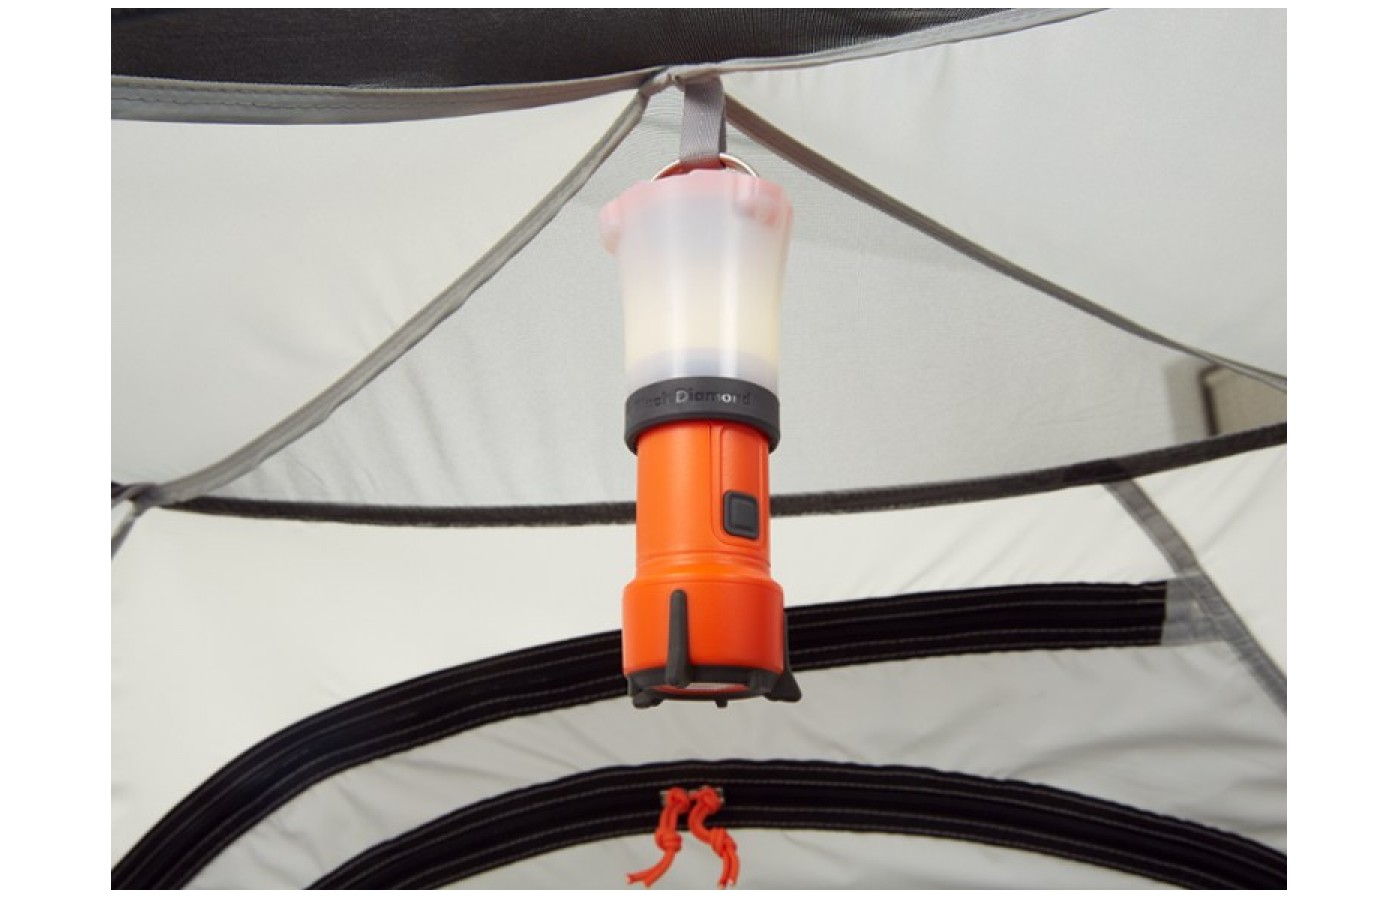 There are hooks in the ceiling that can be used for hanging a small LED lantern. 